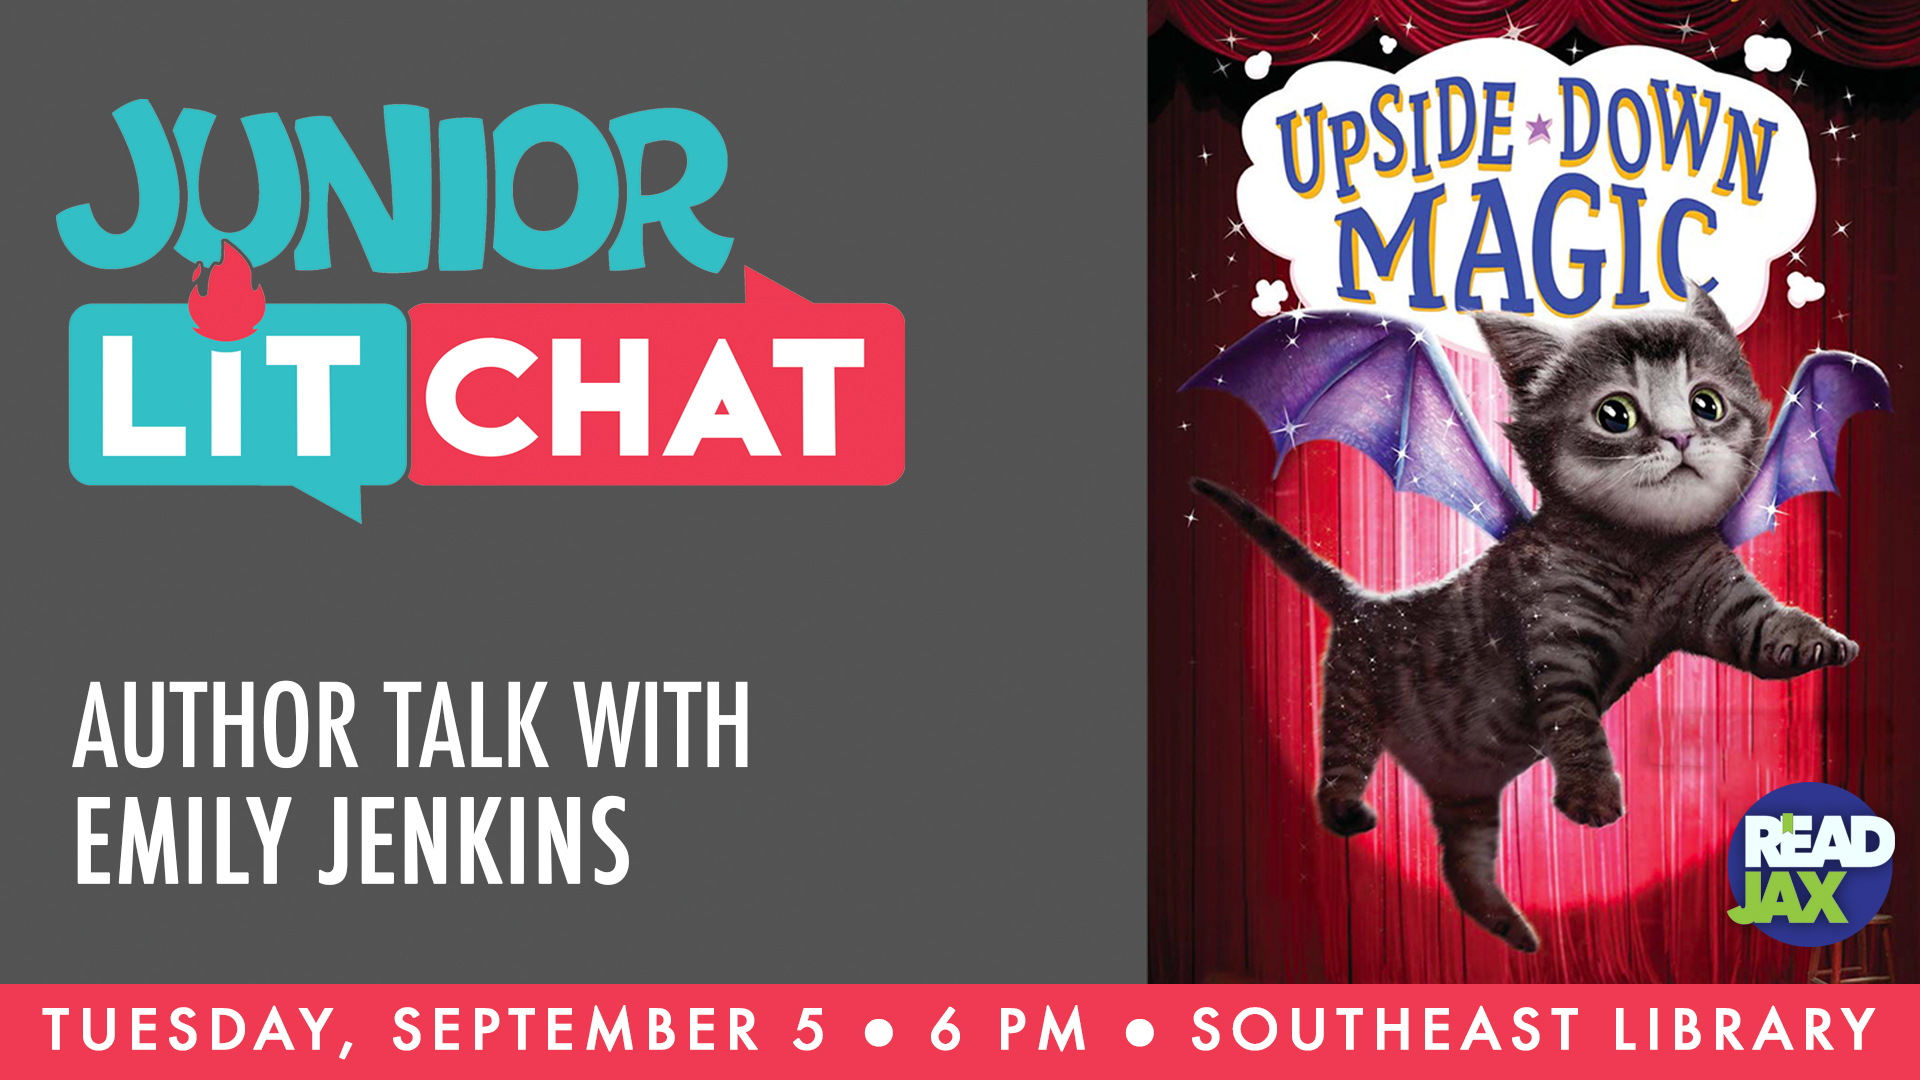 Junior Lit Chat with Emily Jenkins Upside Down Magic September 5